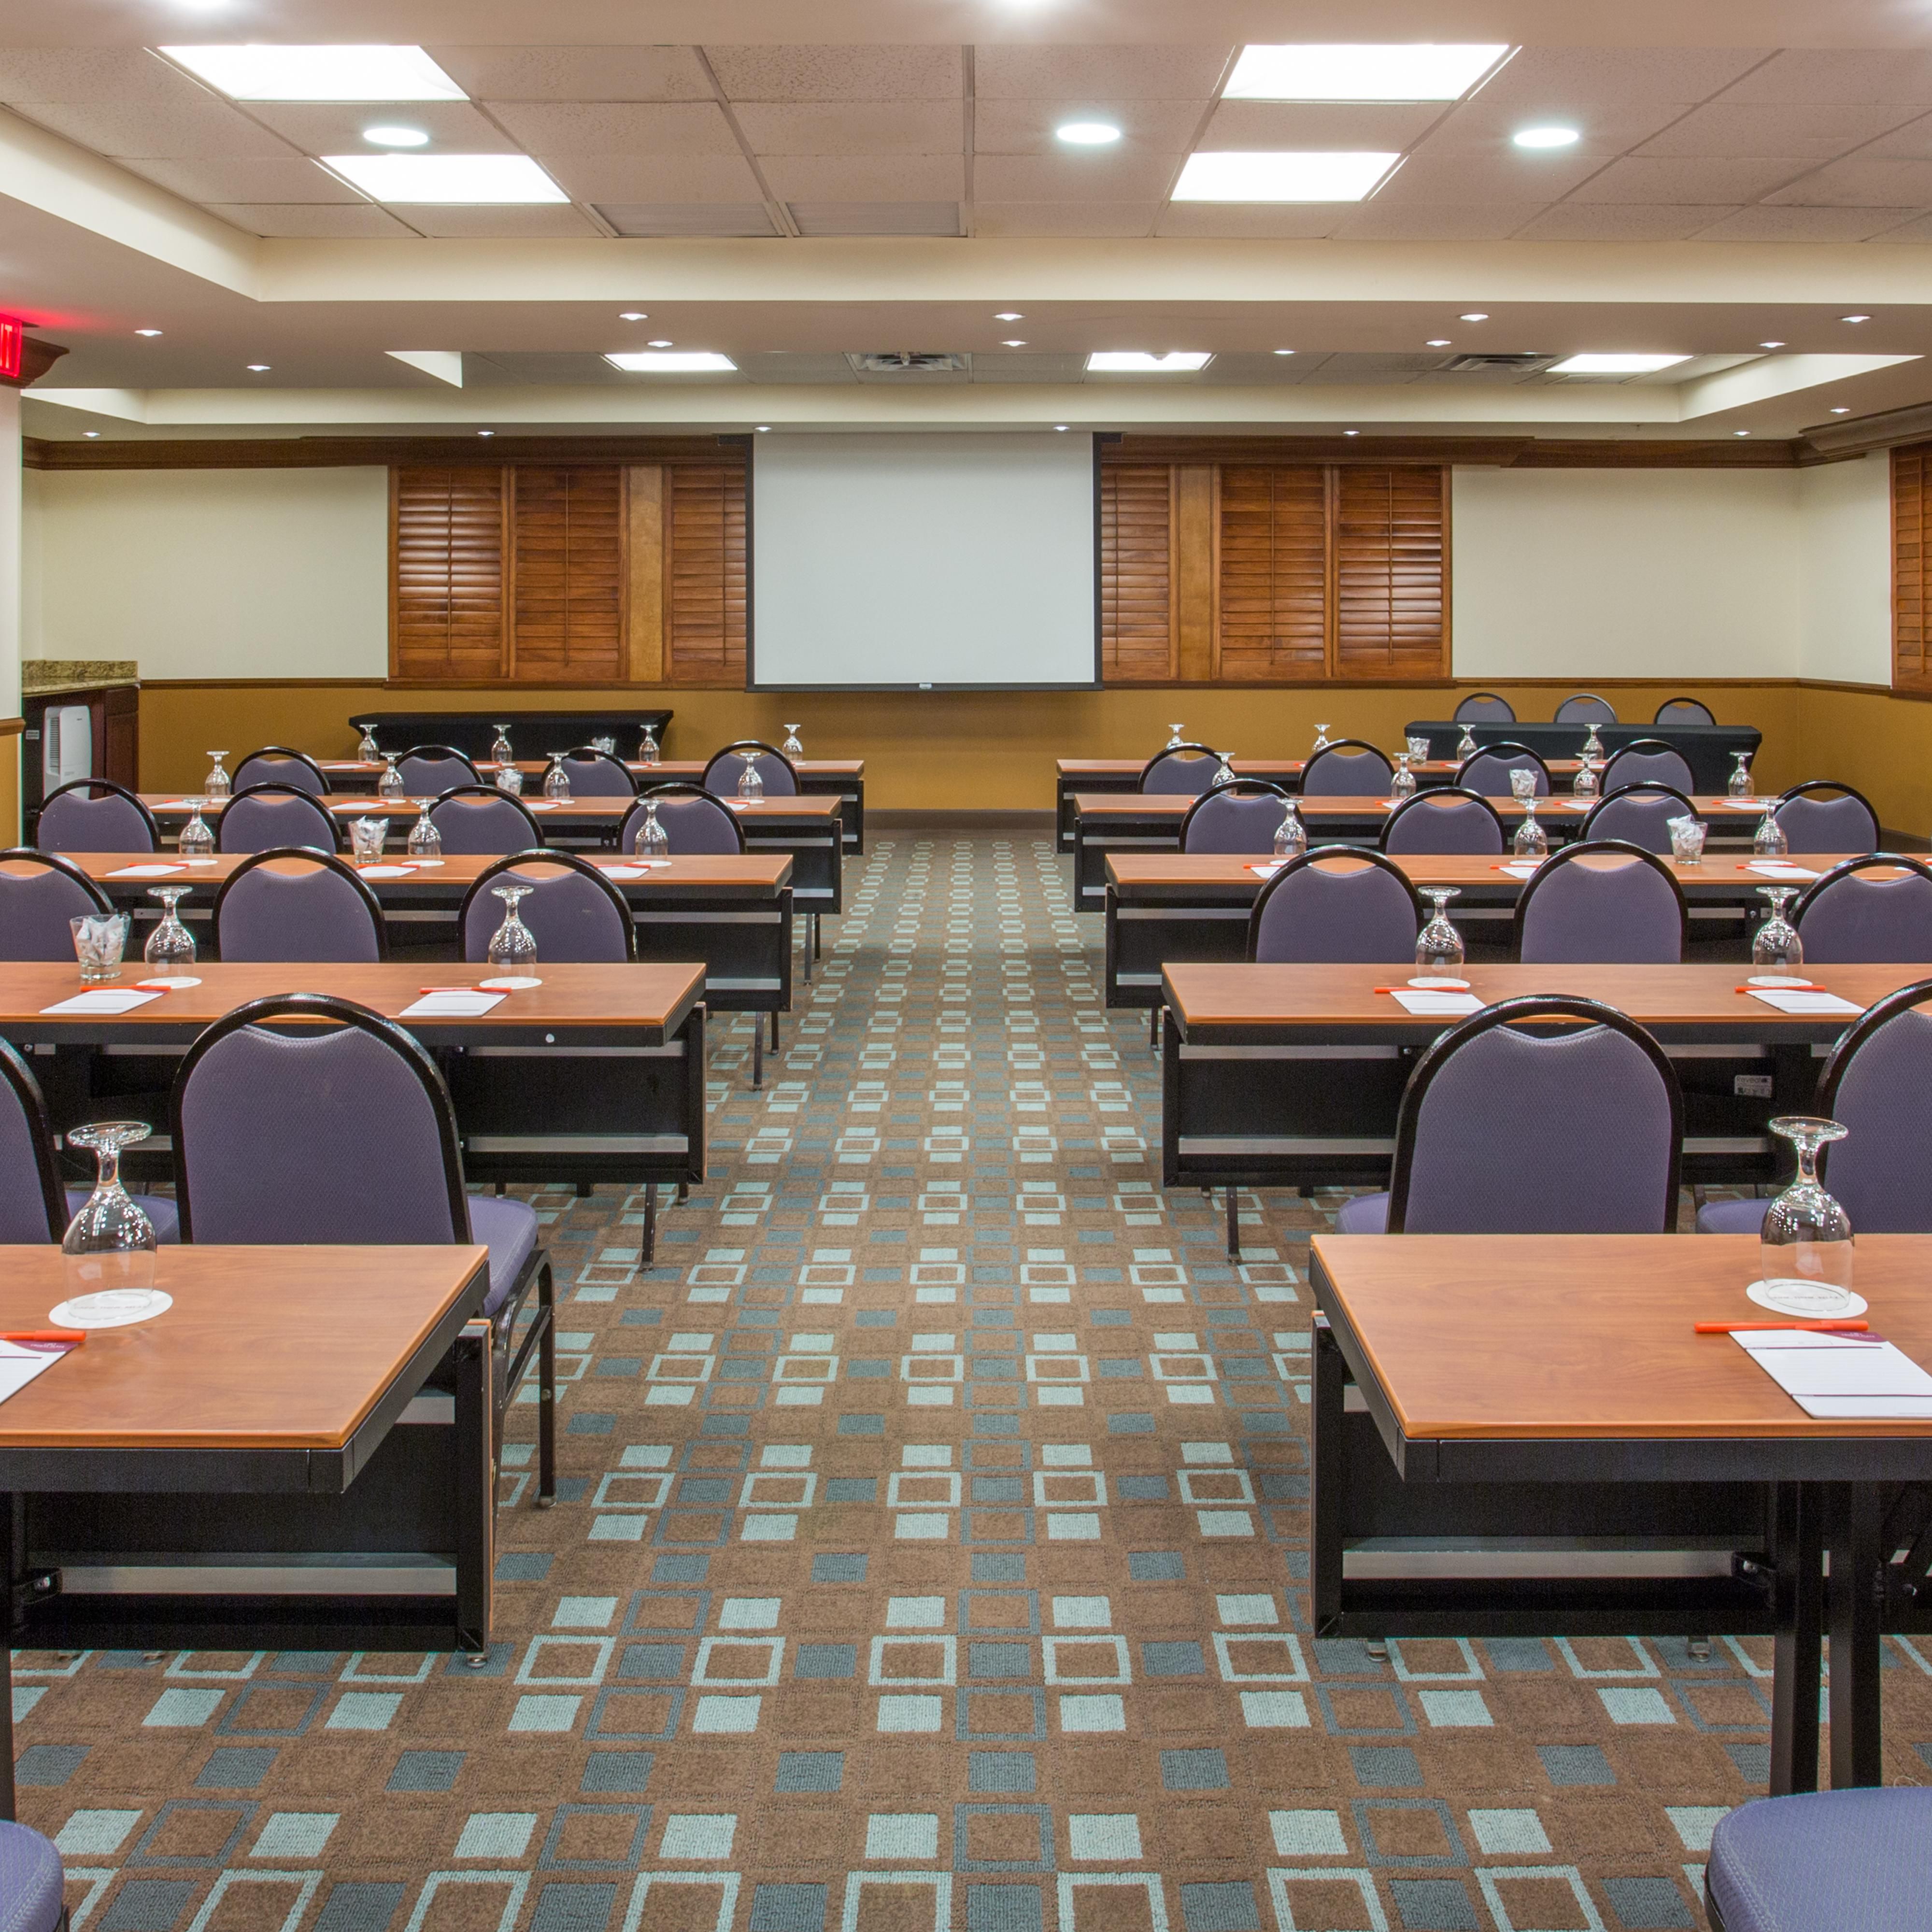 Classroom style is perfect for your next big conference. 